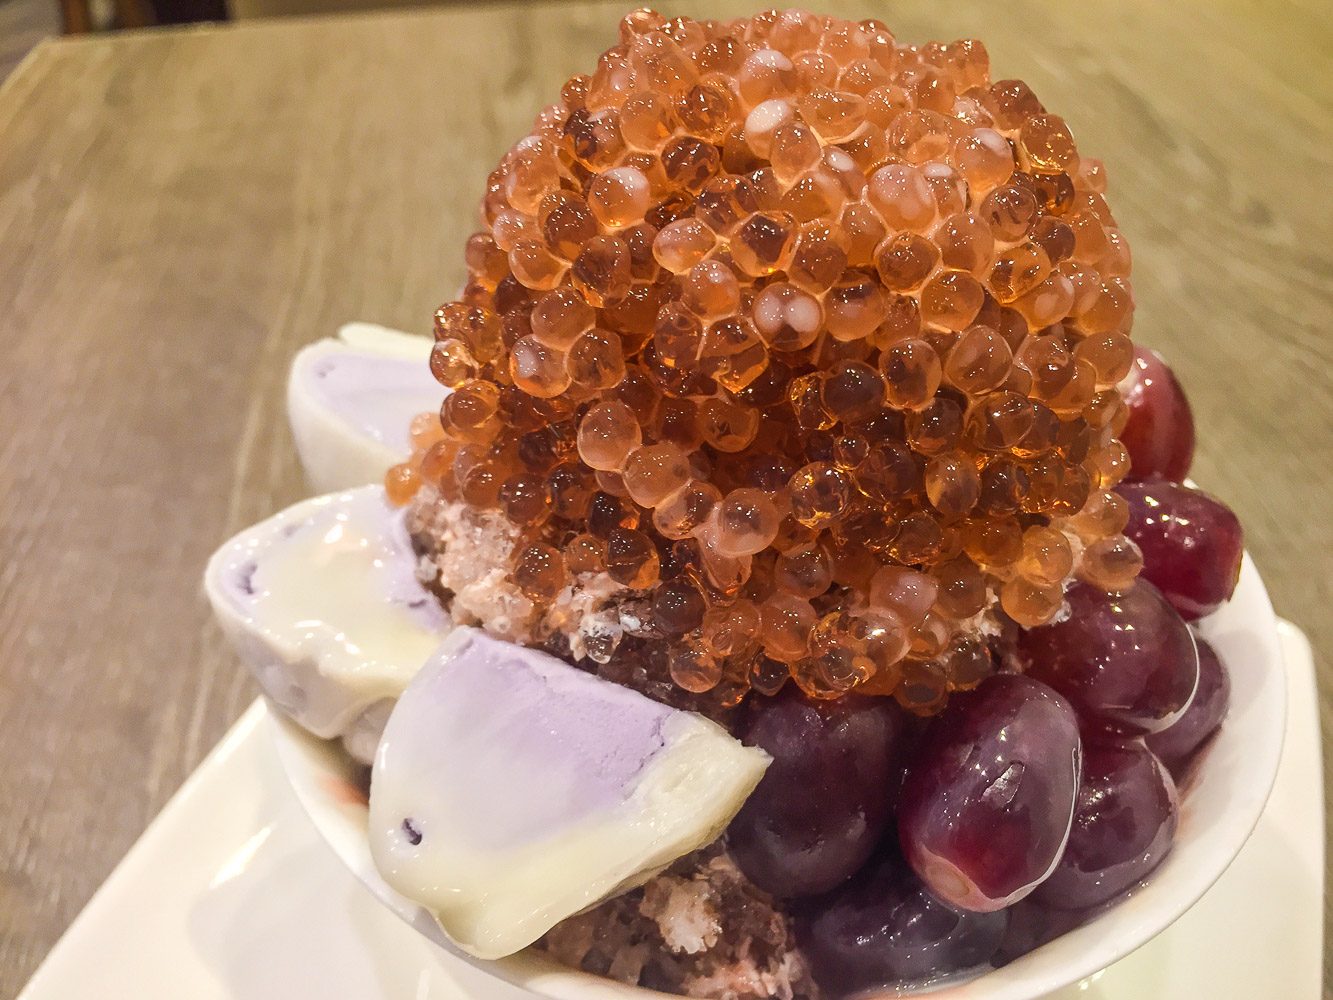 10 things to try at The Dessert Kitchen, Manila’s newest sweet spot